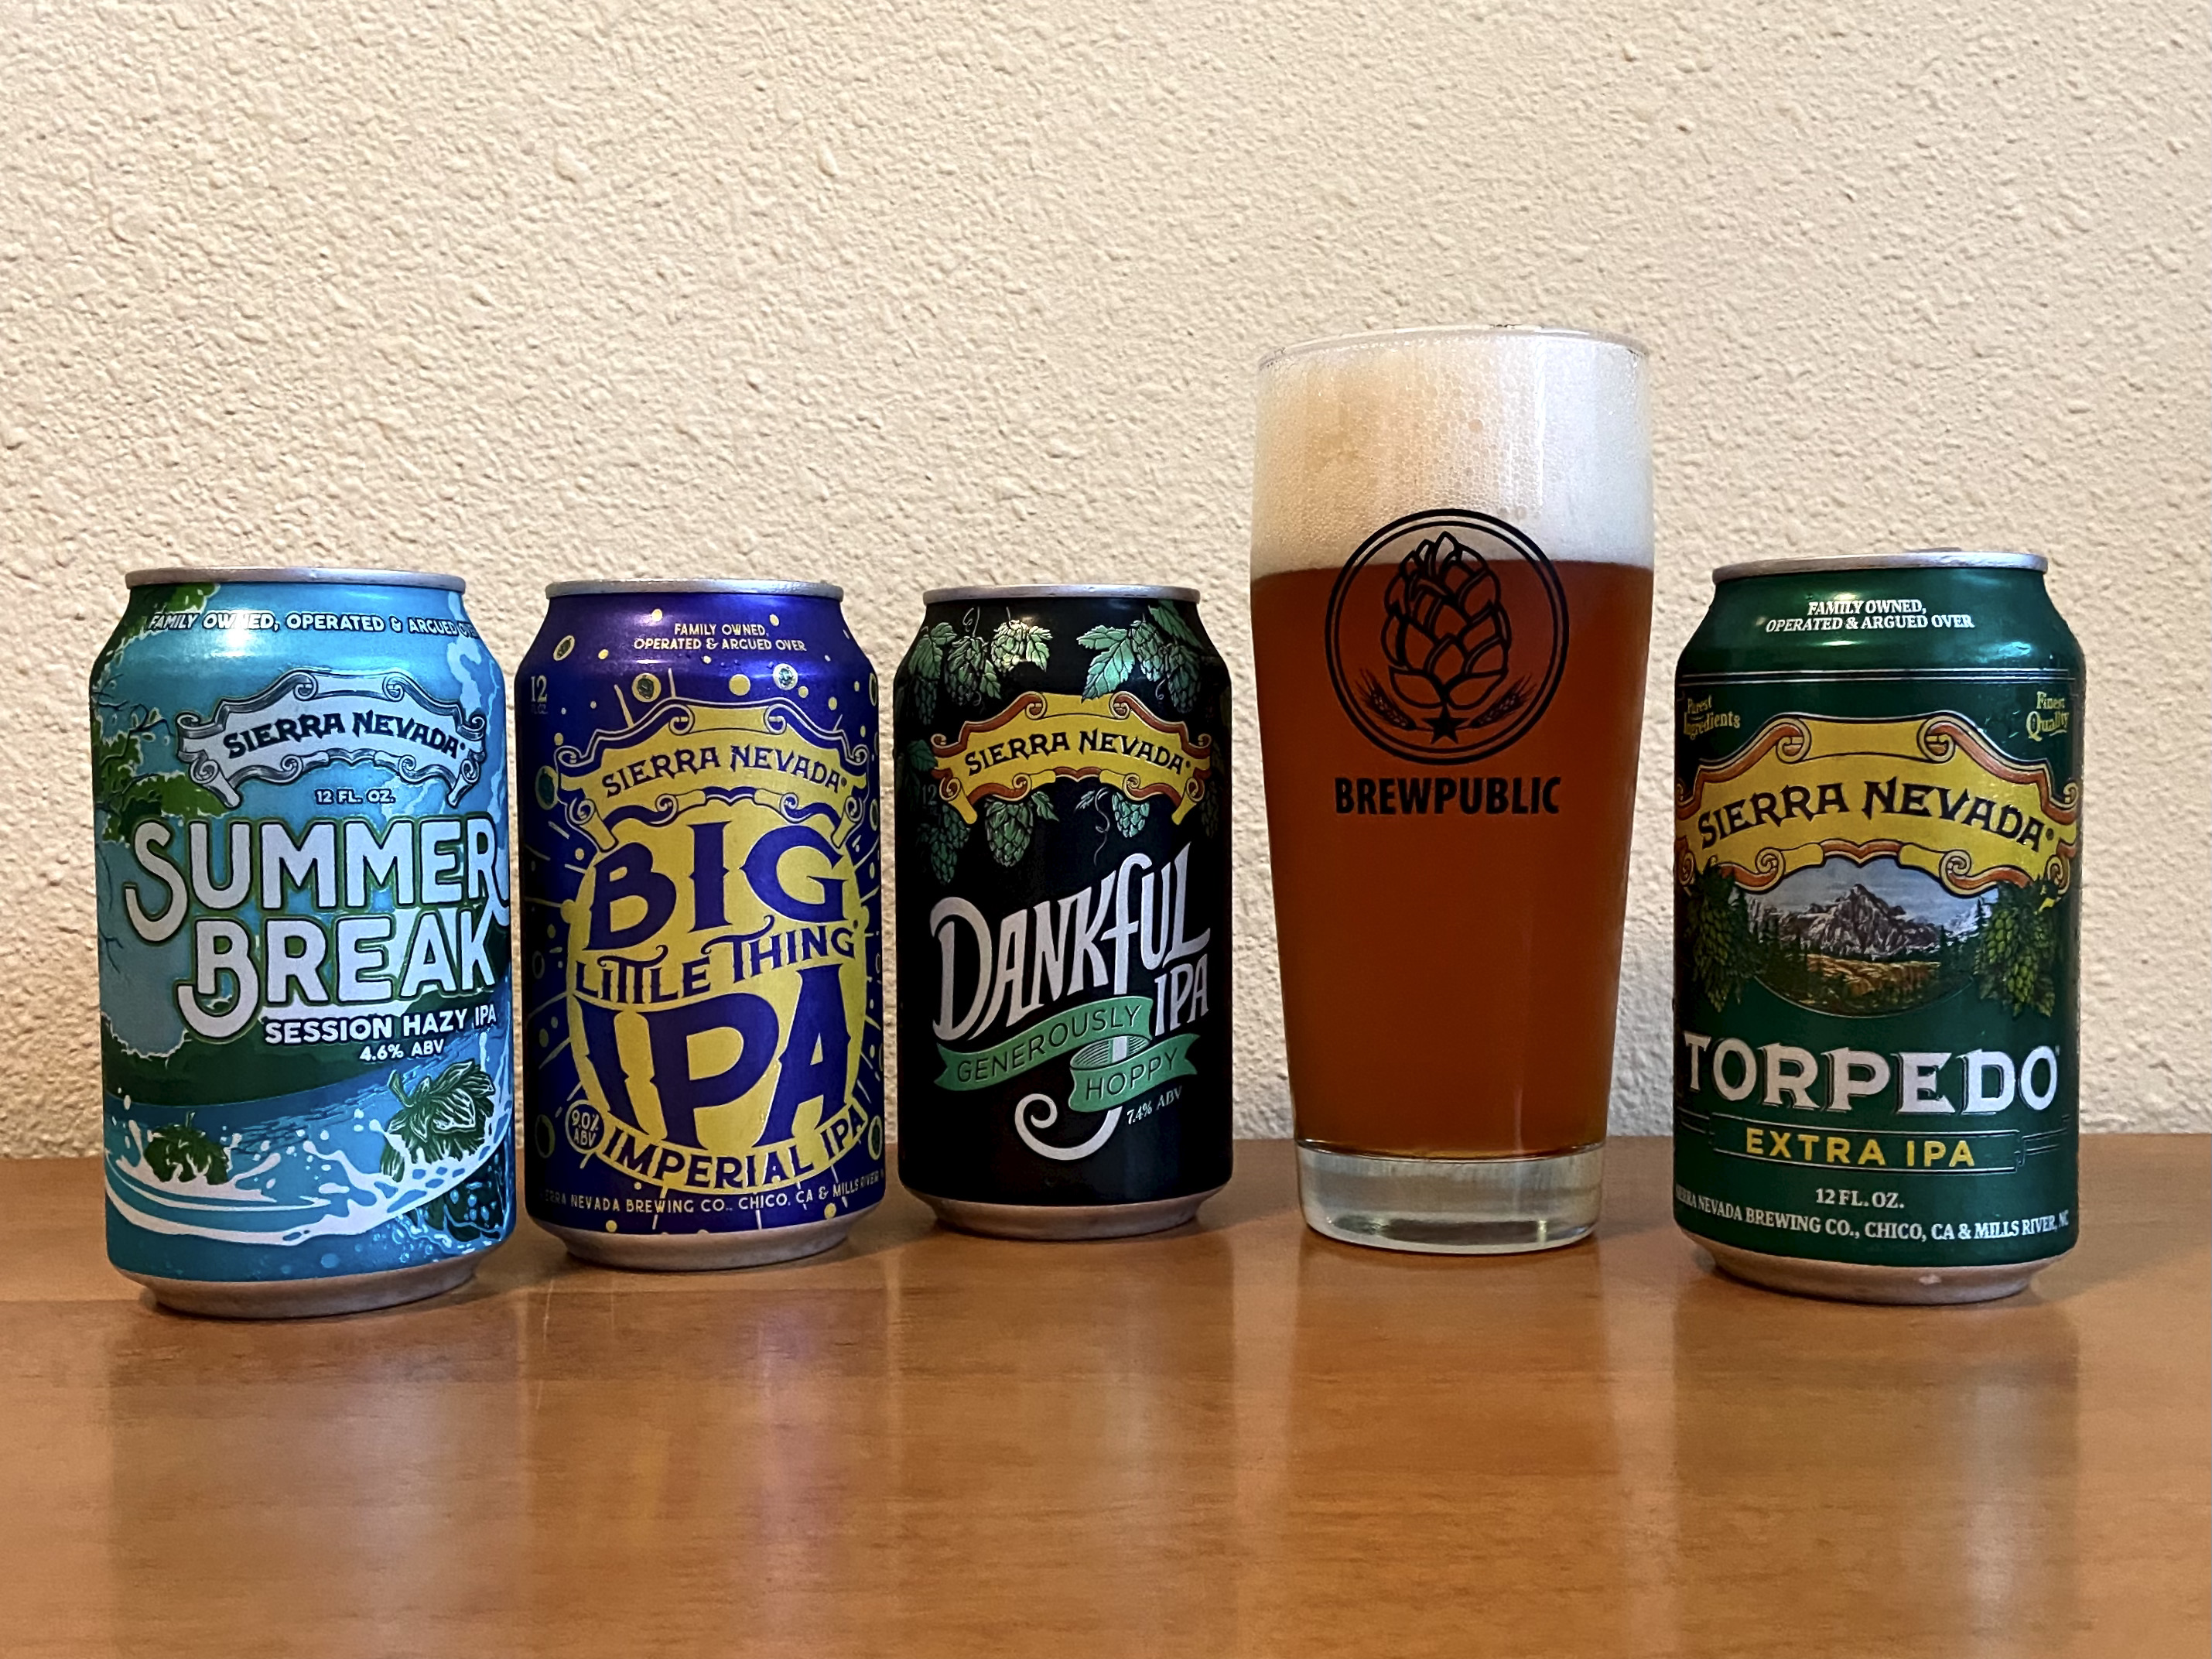 Celebrate National IPA Day with Sierra Nevada Brewing with Summer Breake Session Hazy IPA, Big Little Thing Imperial IPA, Dankful IPA, and Torpedo Extra IPA.